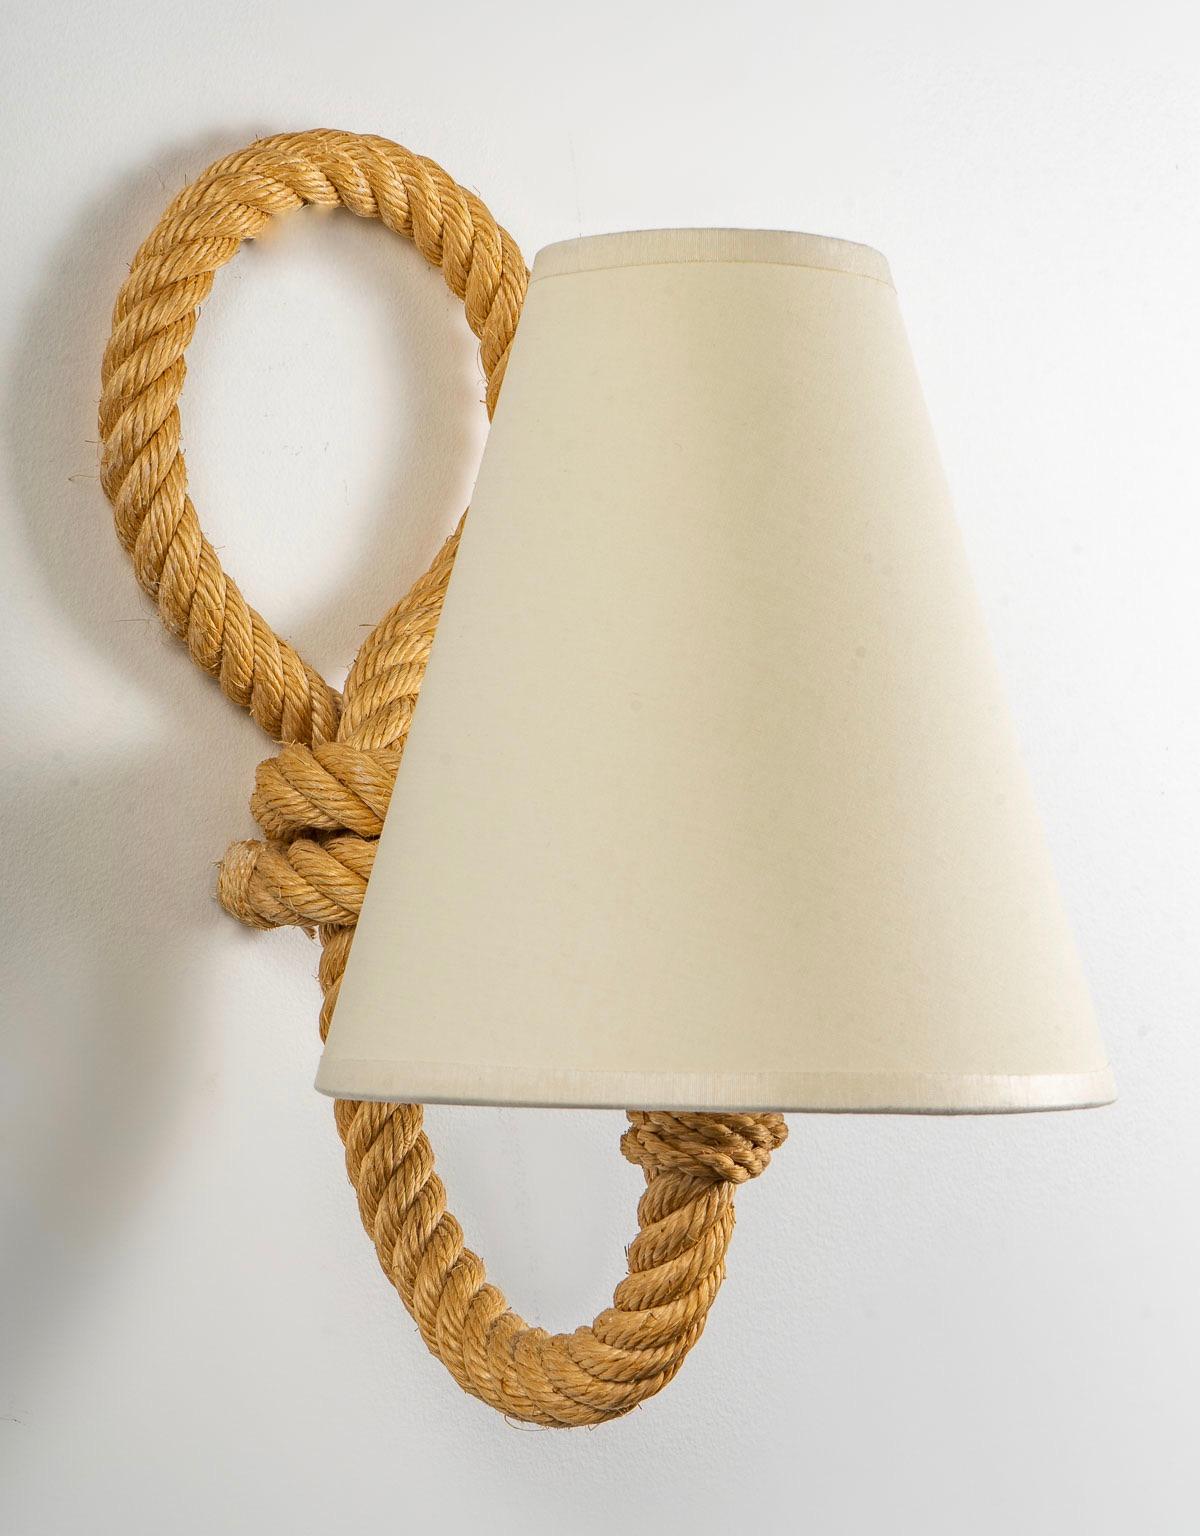 Each wall lamp is composed of a rope arm extending on the upper part to form a loop.
On the lower part, the arm of light returns towards the front, it is dressed with a lampshade in off-white cotton of trapezoidal form.
One bulb per wall